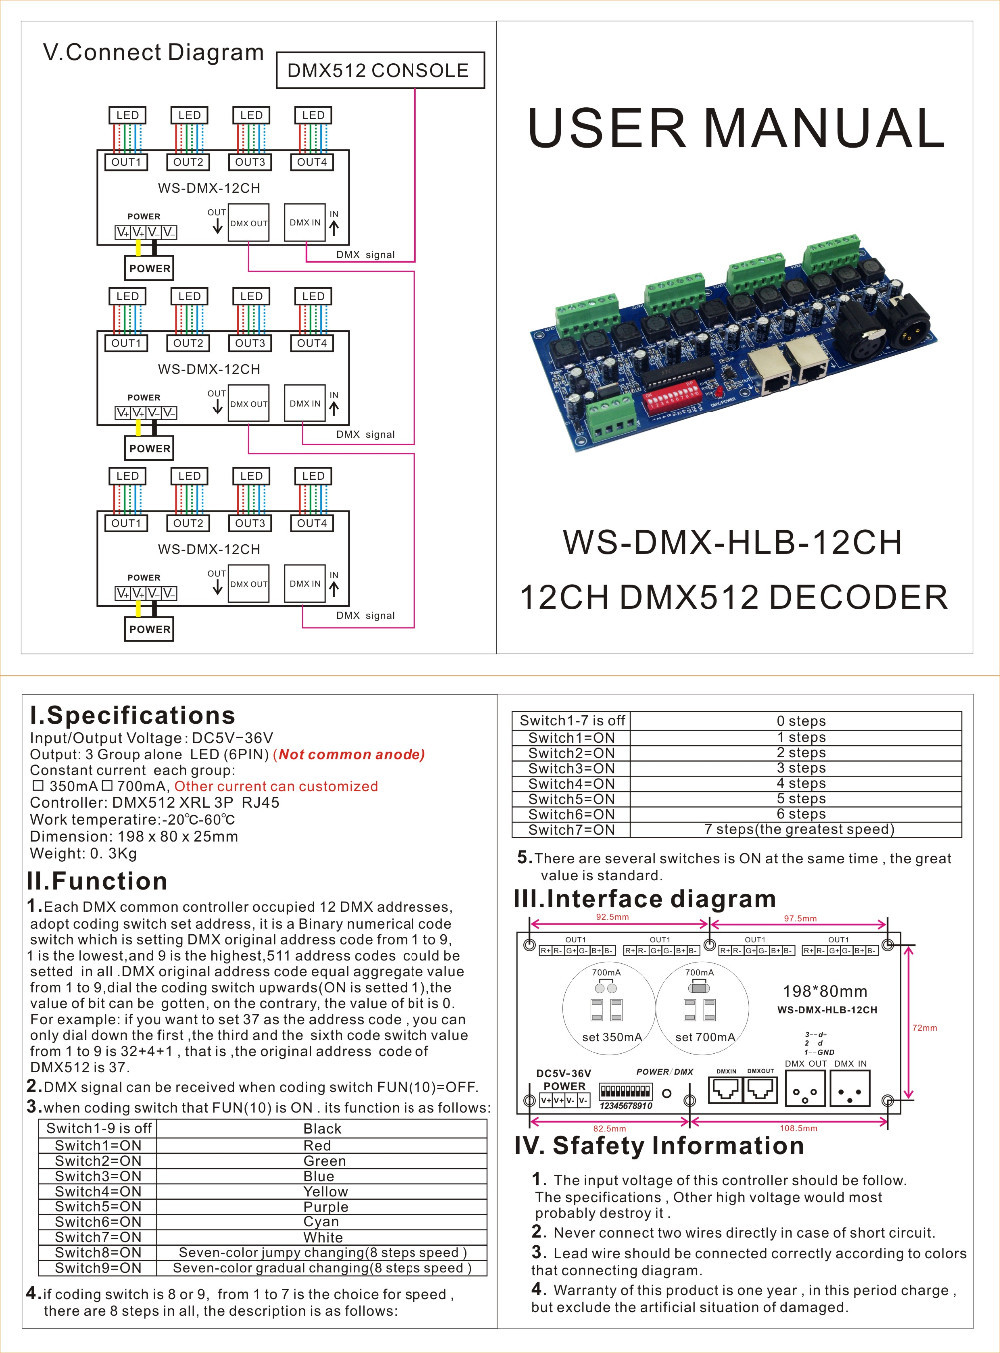 DMX_Controllers_and_Decoders_WS_DMX_HLB_12CH_700MA_2